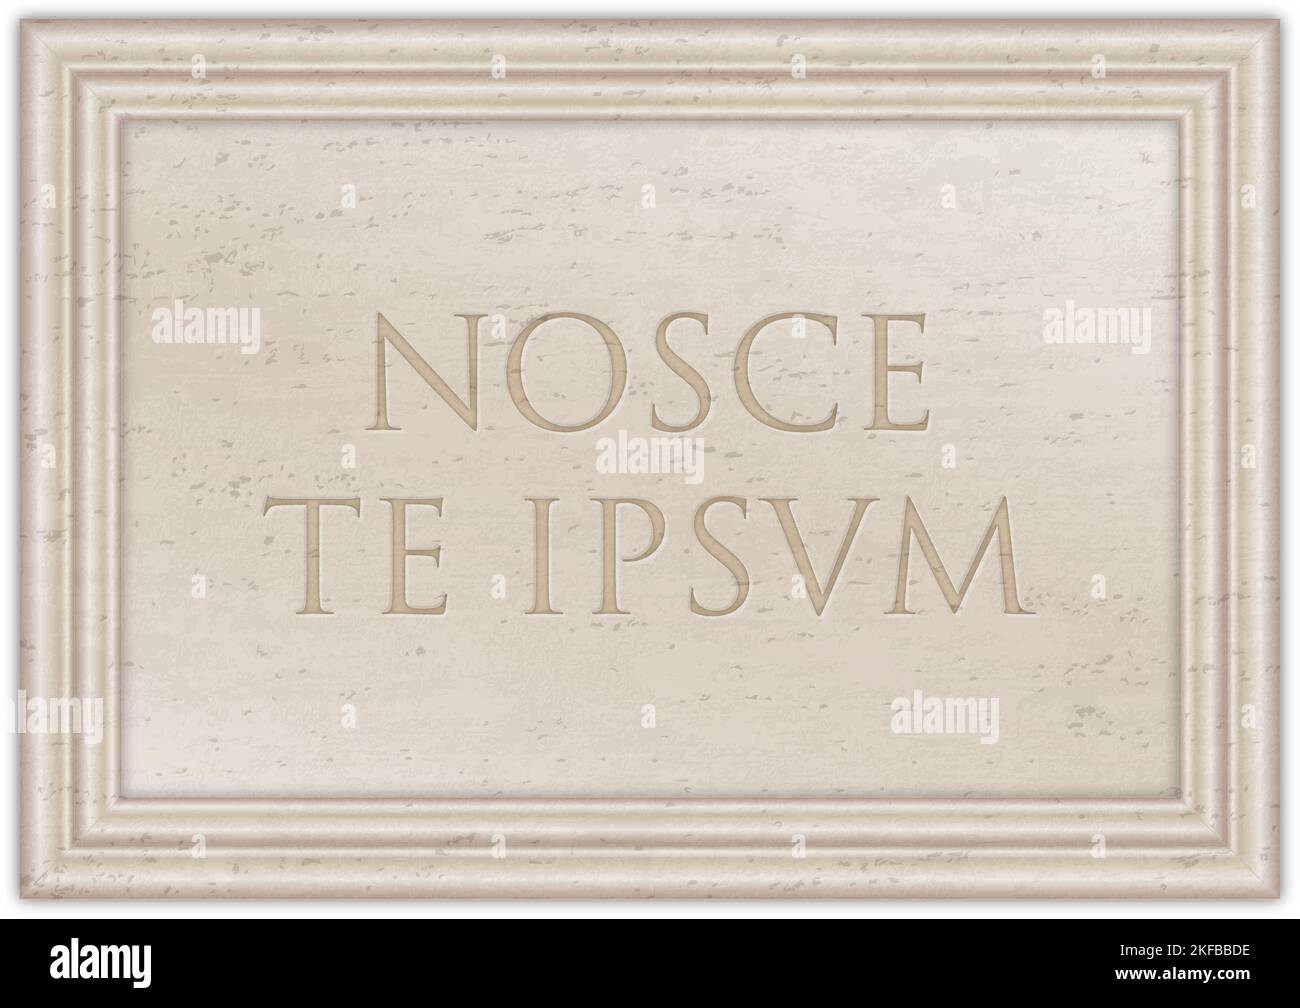 Marble plaque with ancient Latin proverb 'NOSCE TE IPSUM', know yourself, illustration Stock Photo